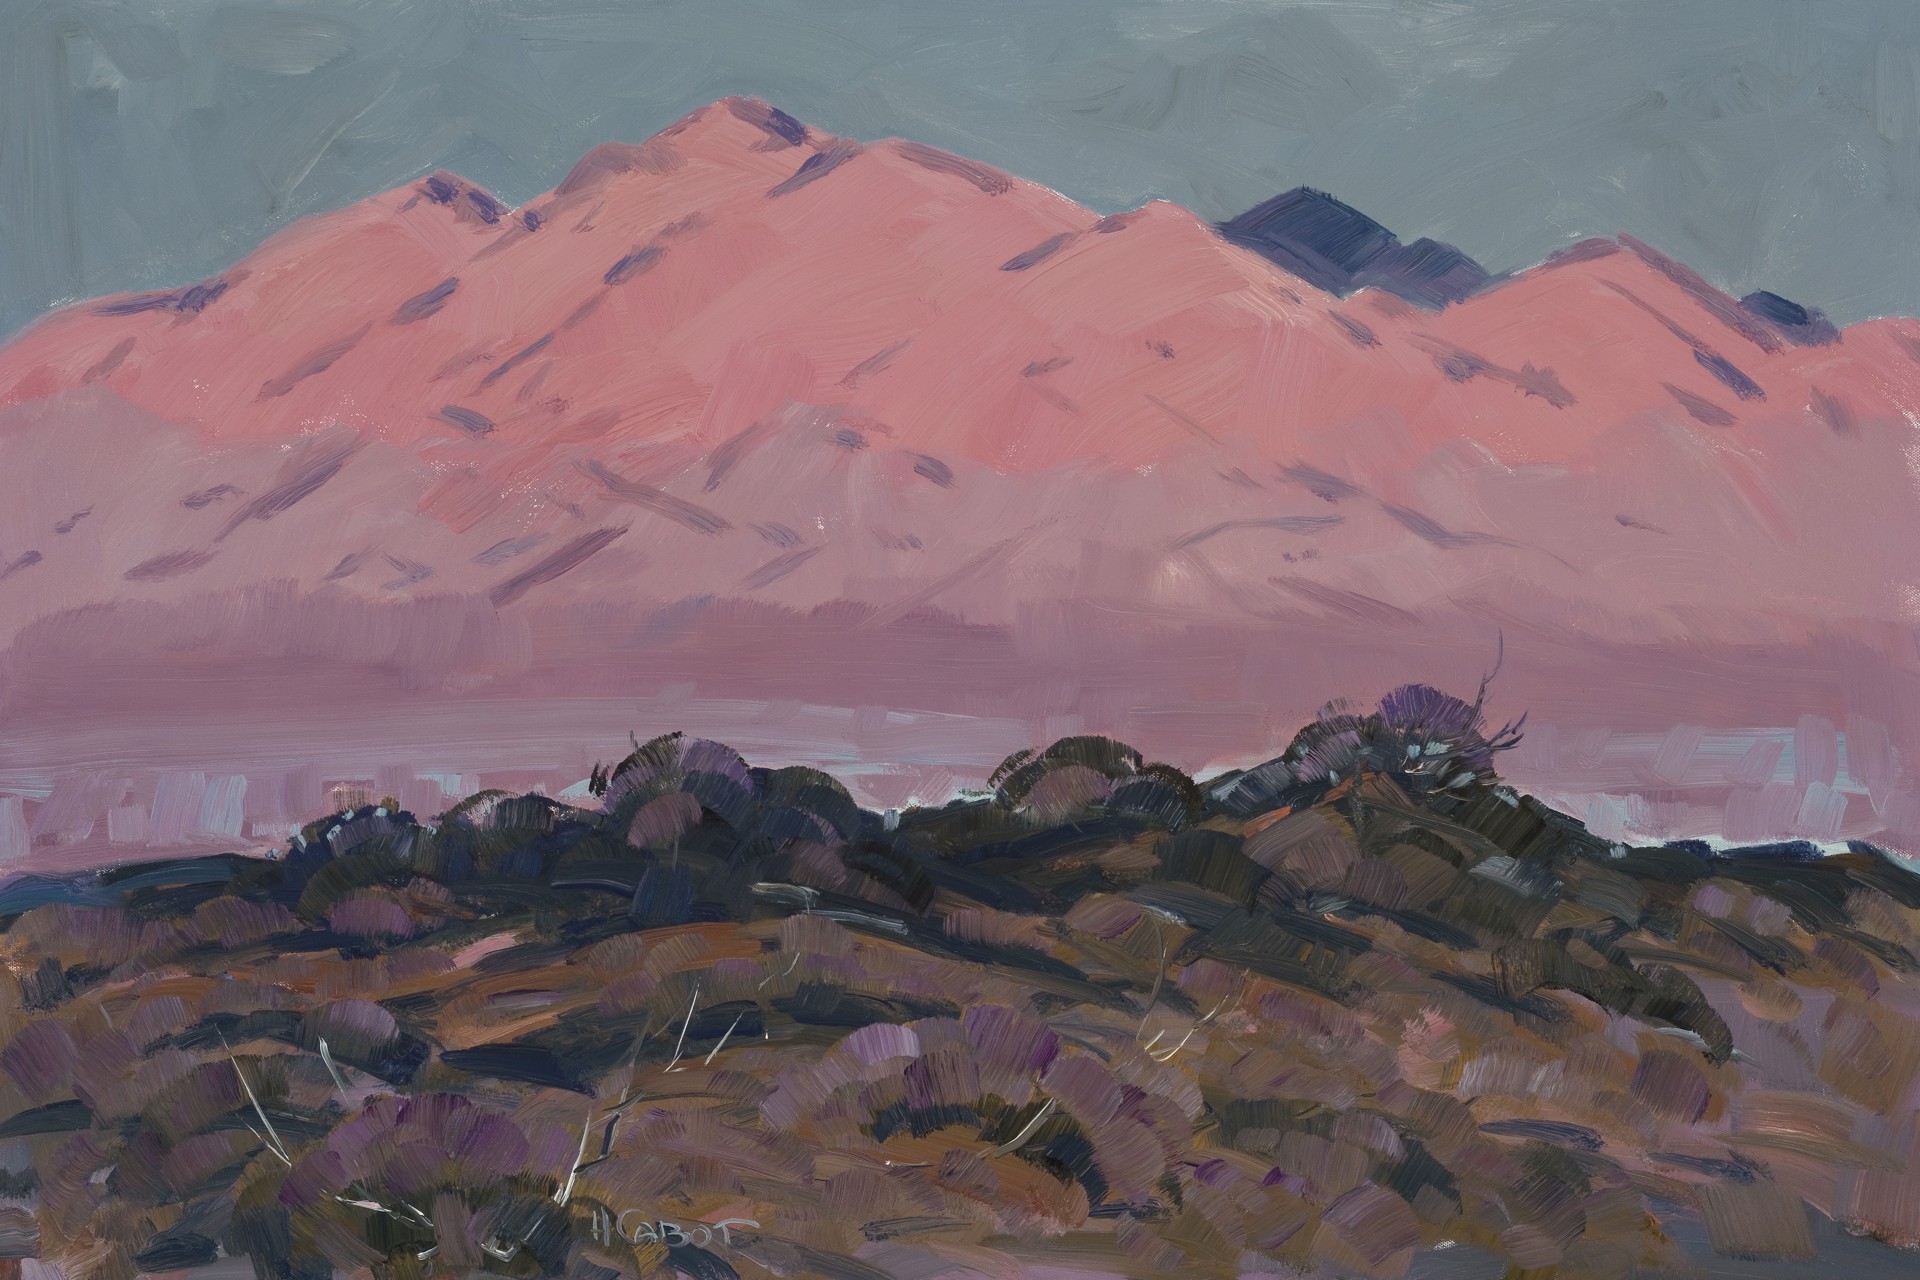 When the Mountains Gets Pink by Originals Hugh Cabot